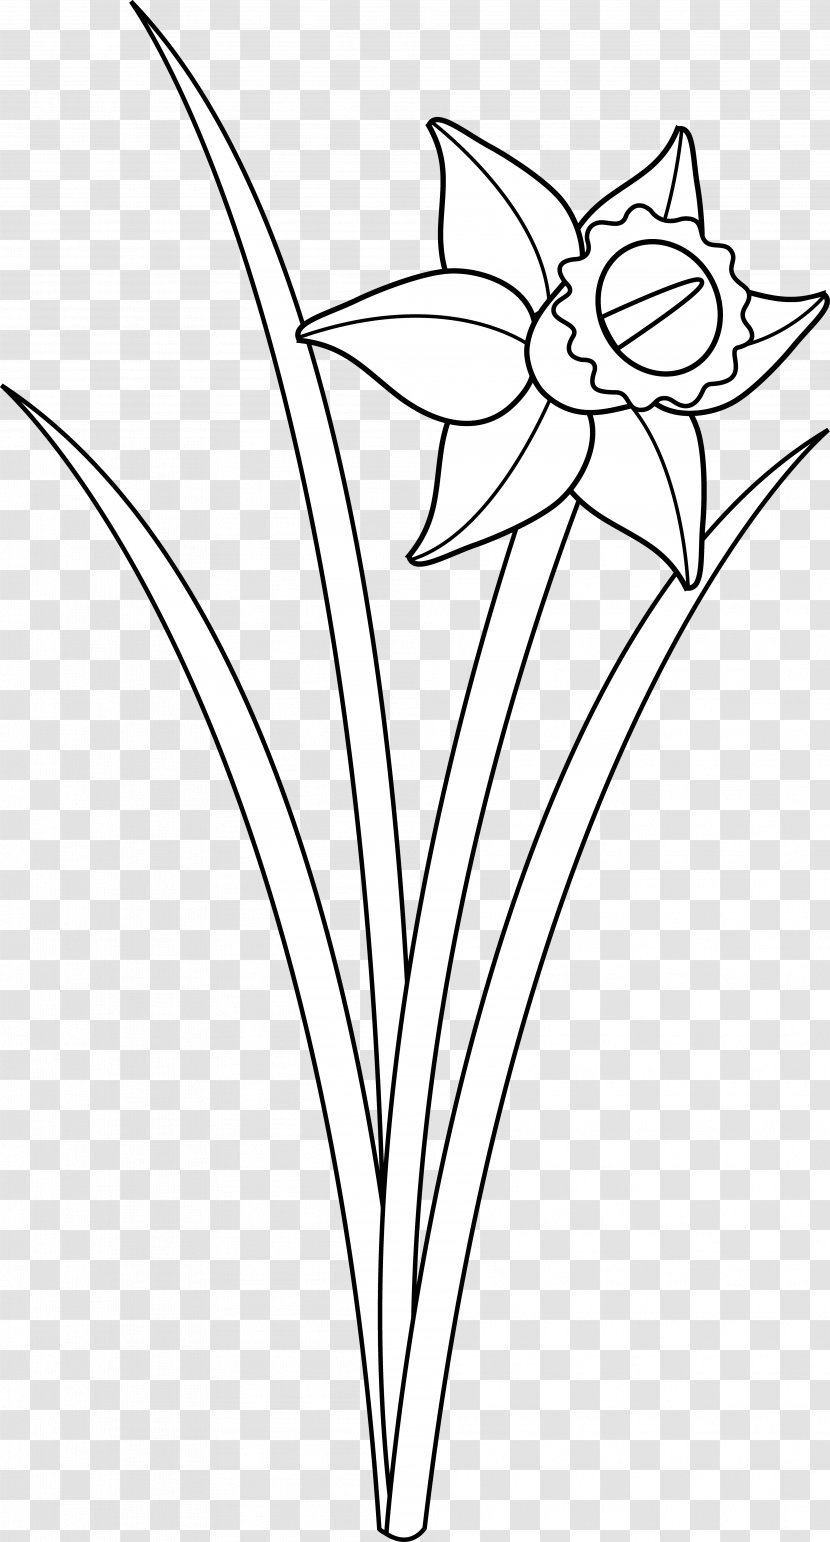 Daffodil Drawing Flower Black And White Clip Art - Artwork - Cliparts Transparent PNG